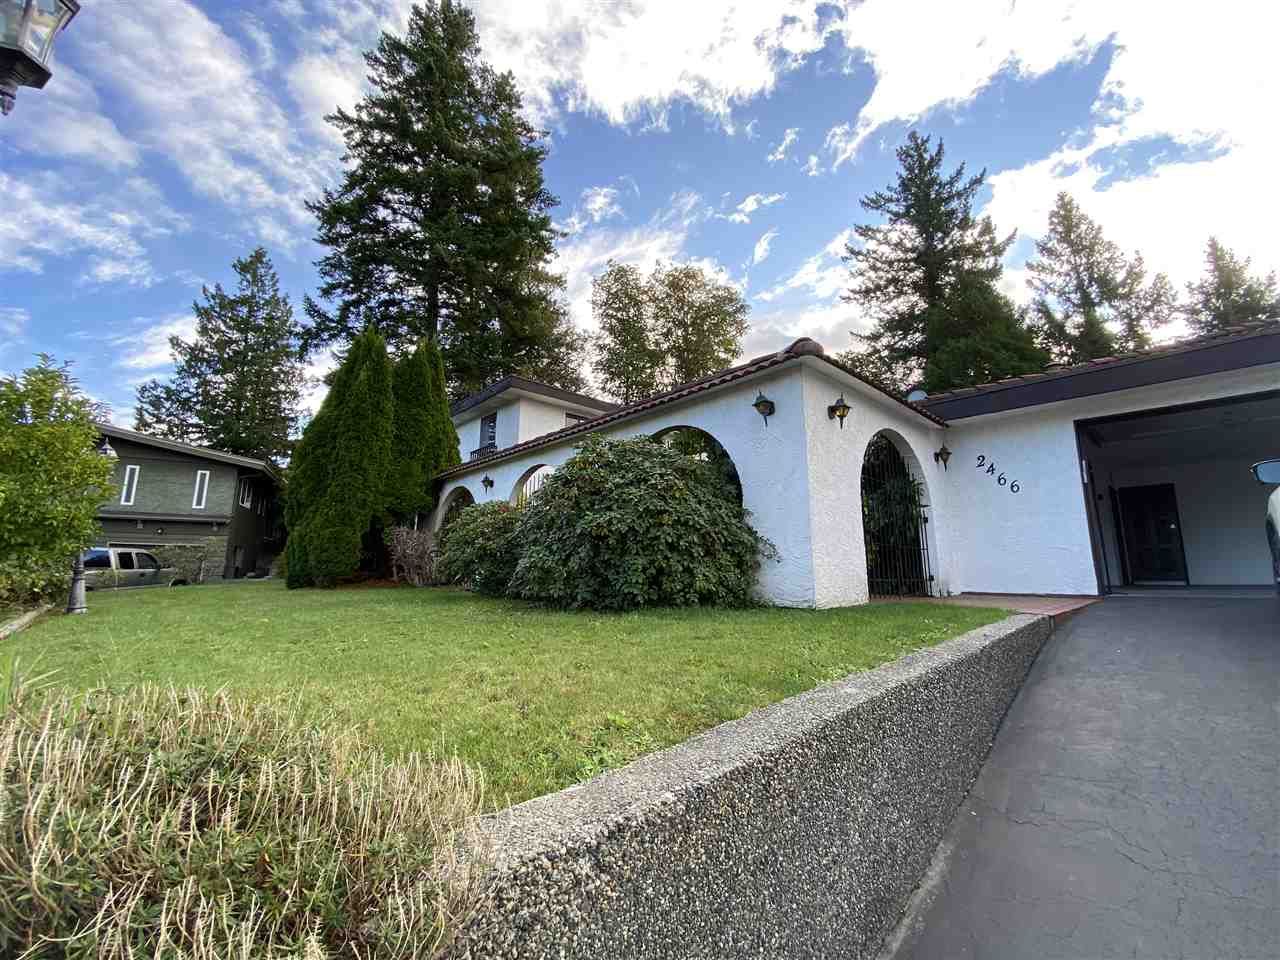 The Lal's have sold a property at 2466 MAGNOLIA CRES in Abbotsford